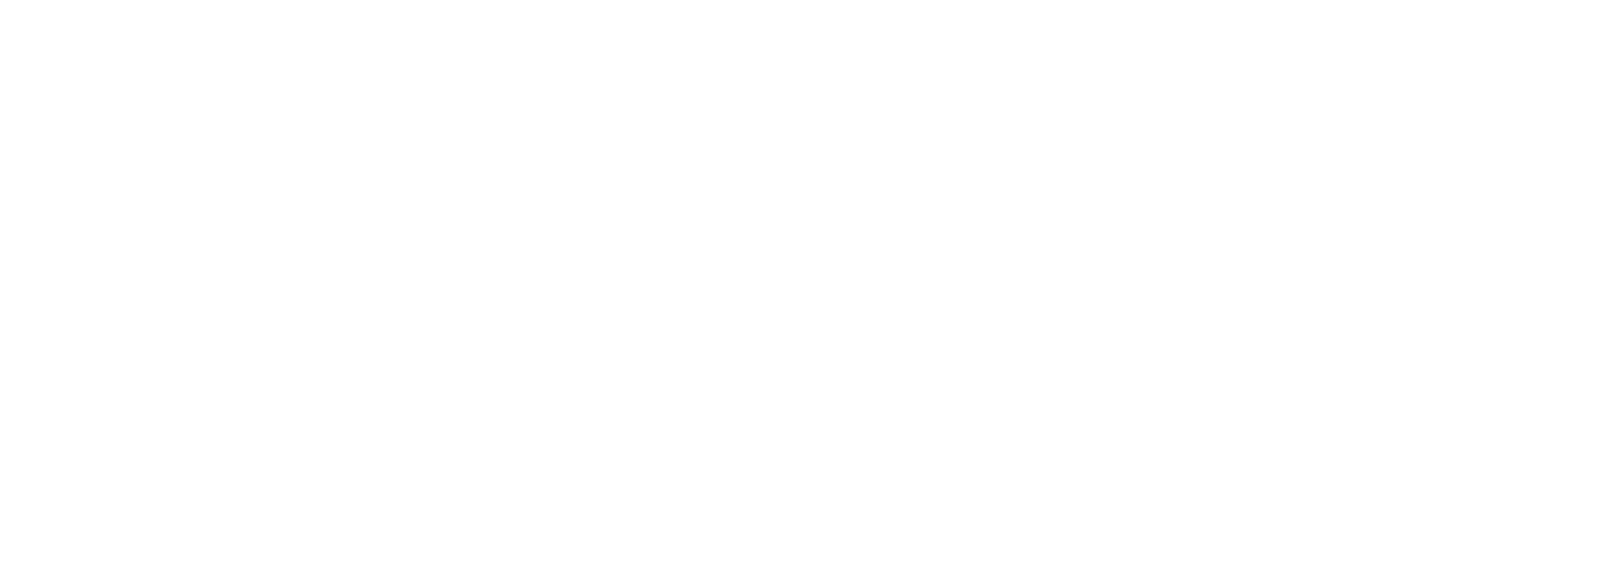 Distinctive kitchens creating designer kitchens in Brisbane with custom cabinet makers for kitchen renovations with bespoke joinery. remodeling kitchens with a 3d kitchen planner and full kitchen floor plans white